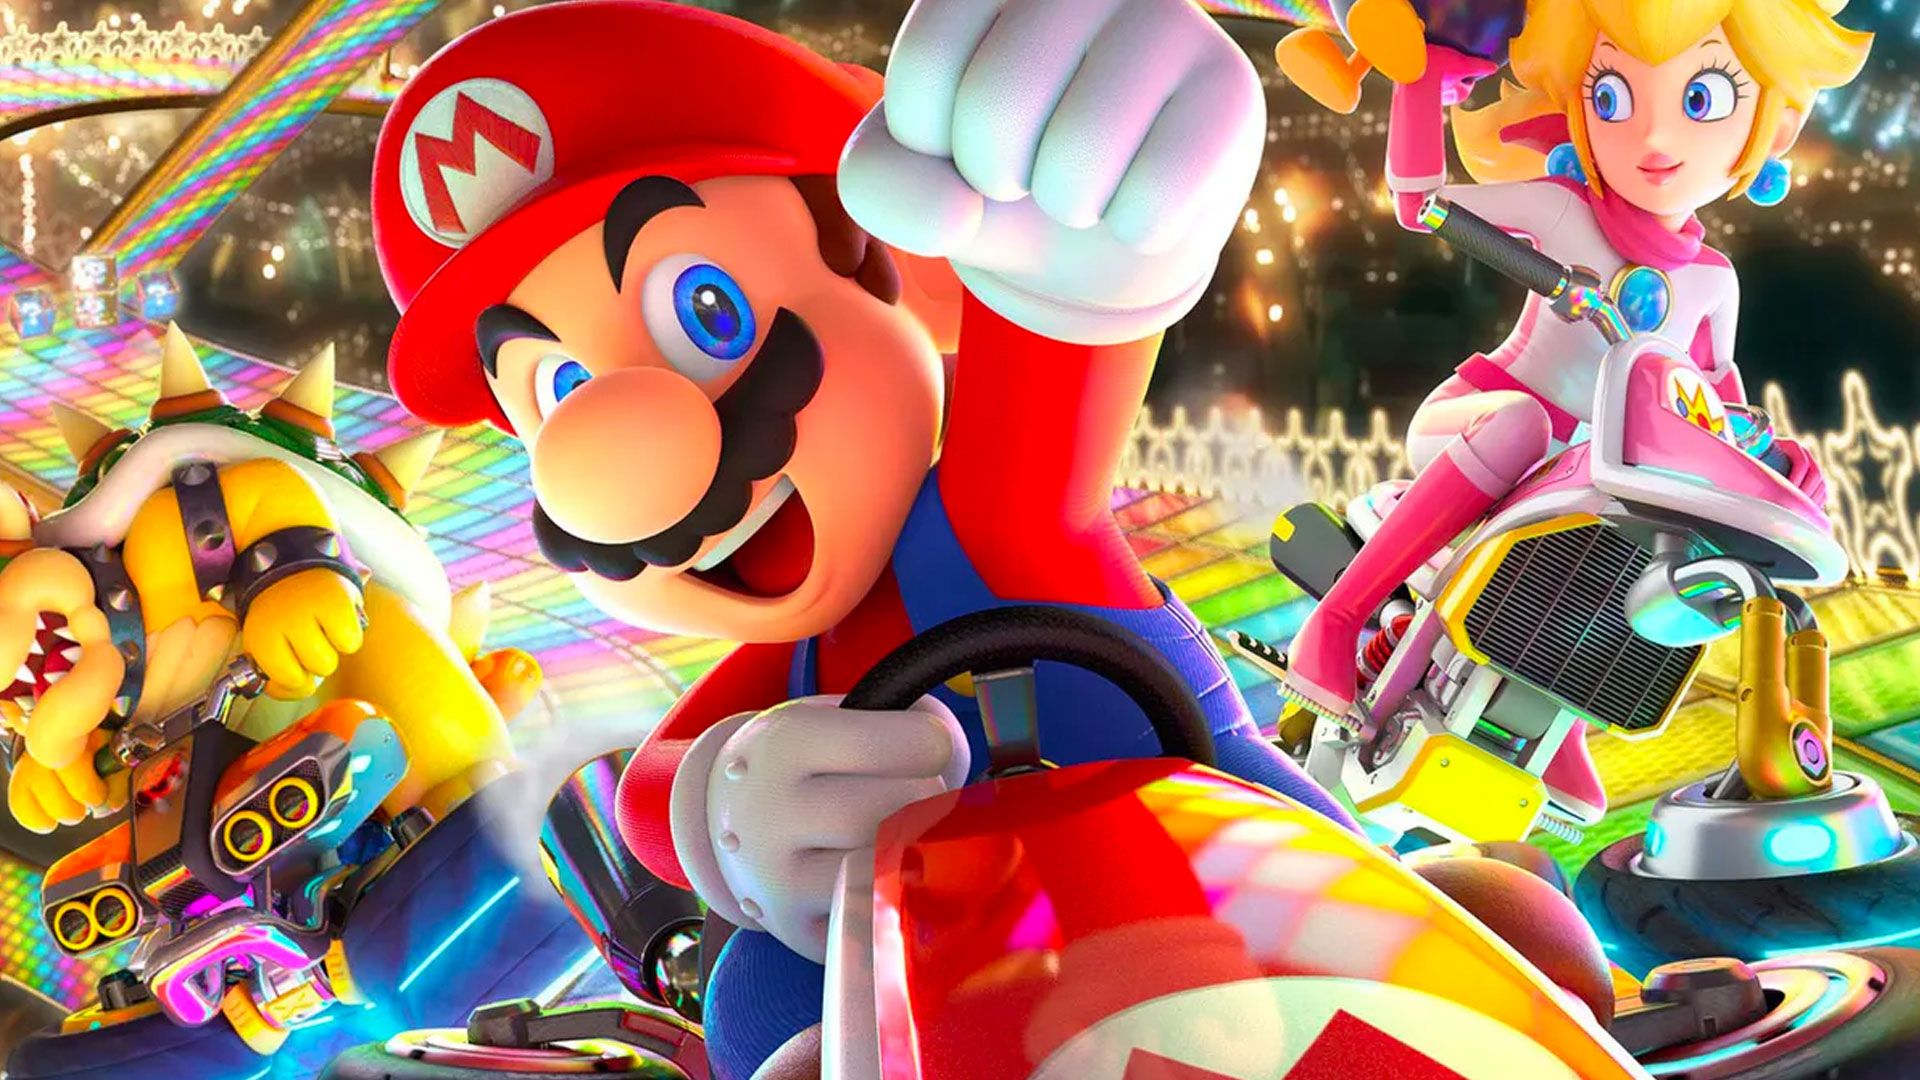 Best Switch racing games: Mario punches the air as he drives his kart in Mario Kart 8